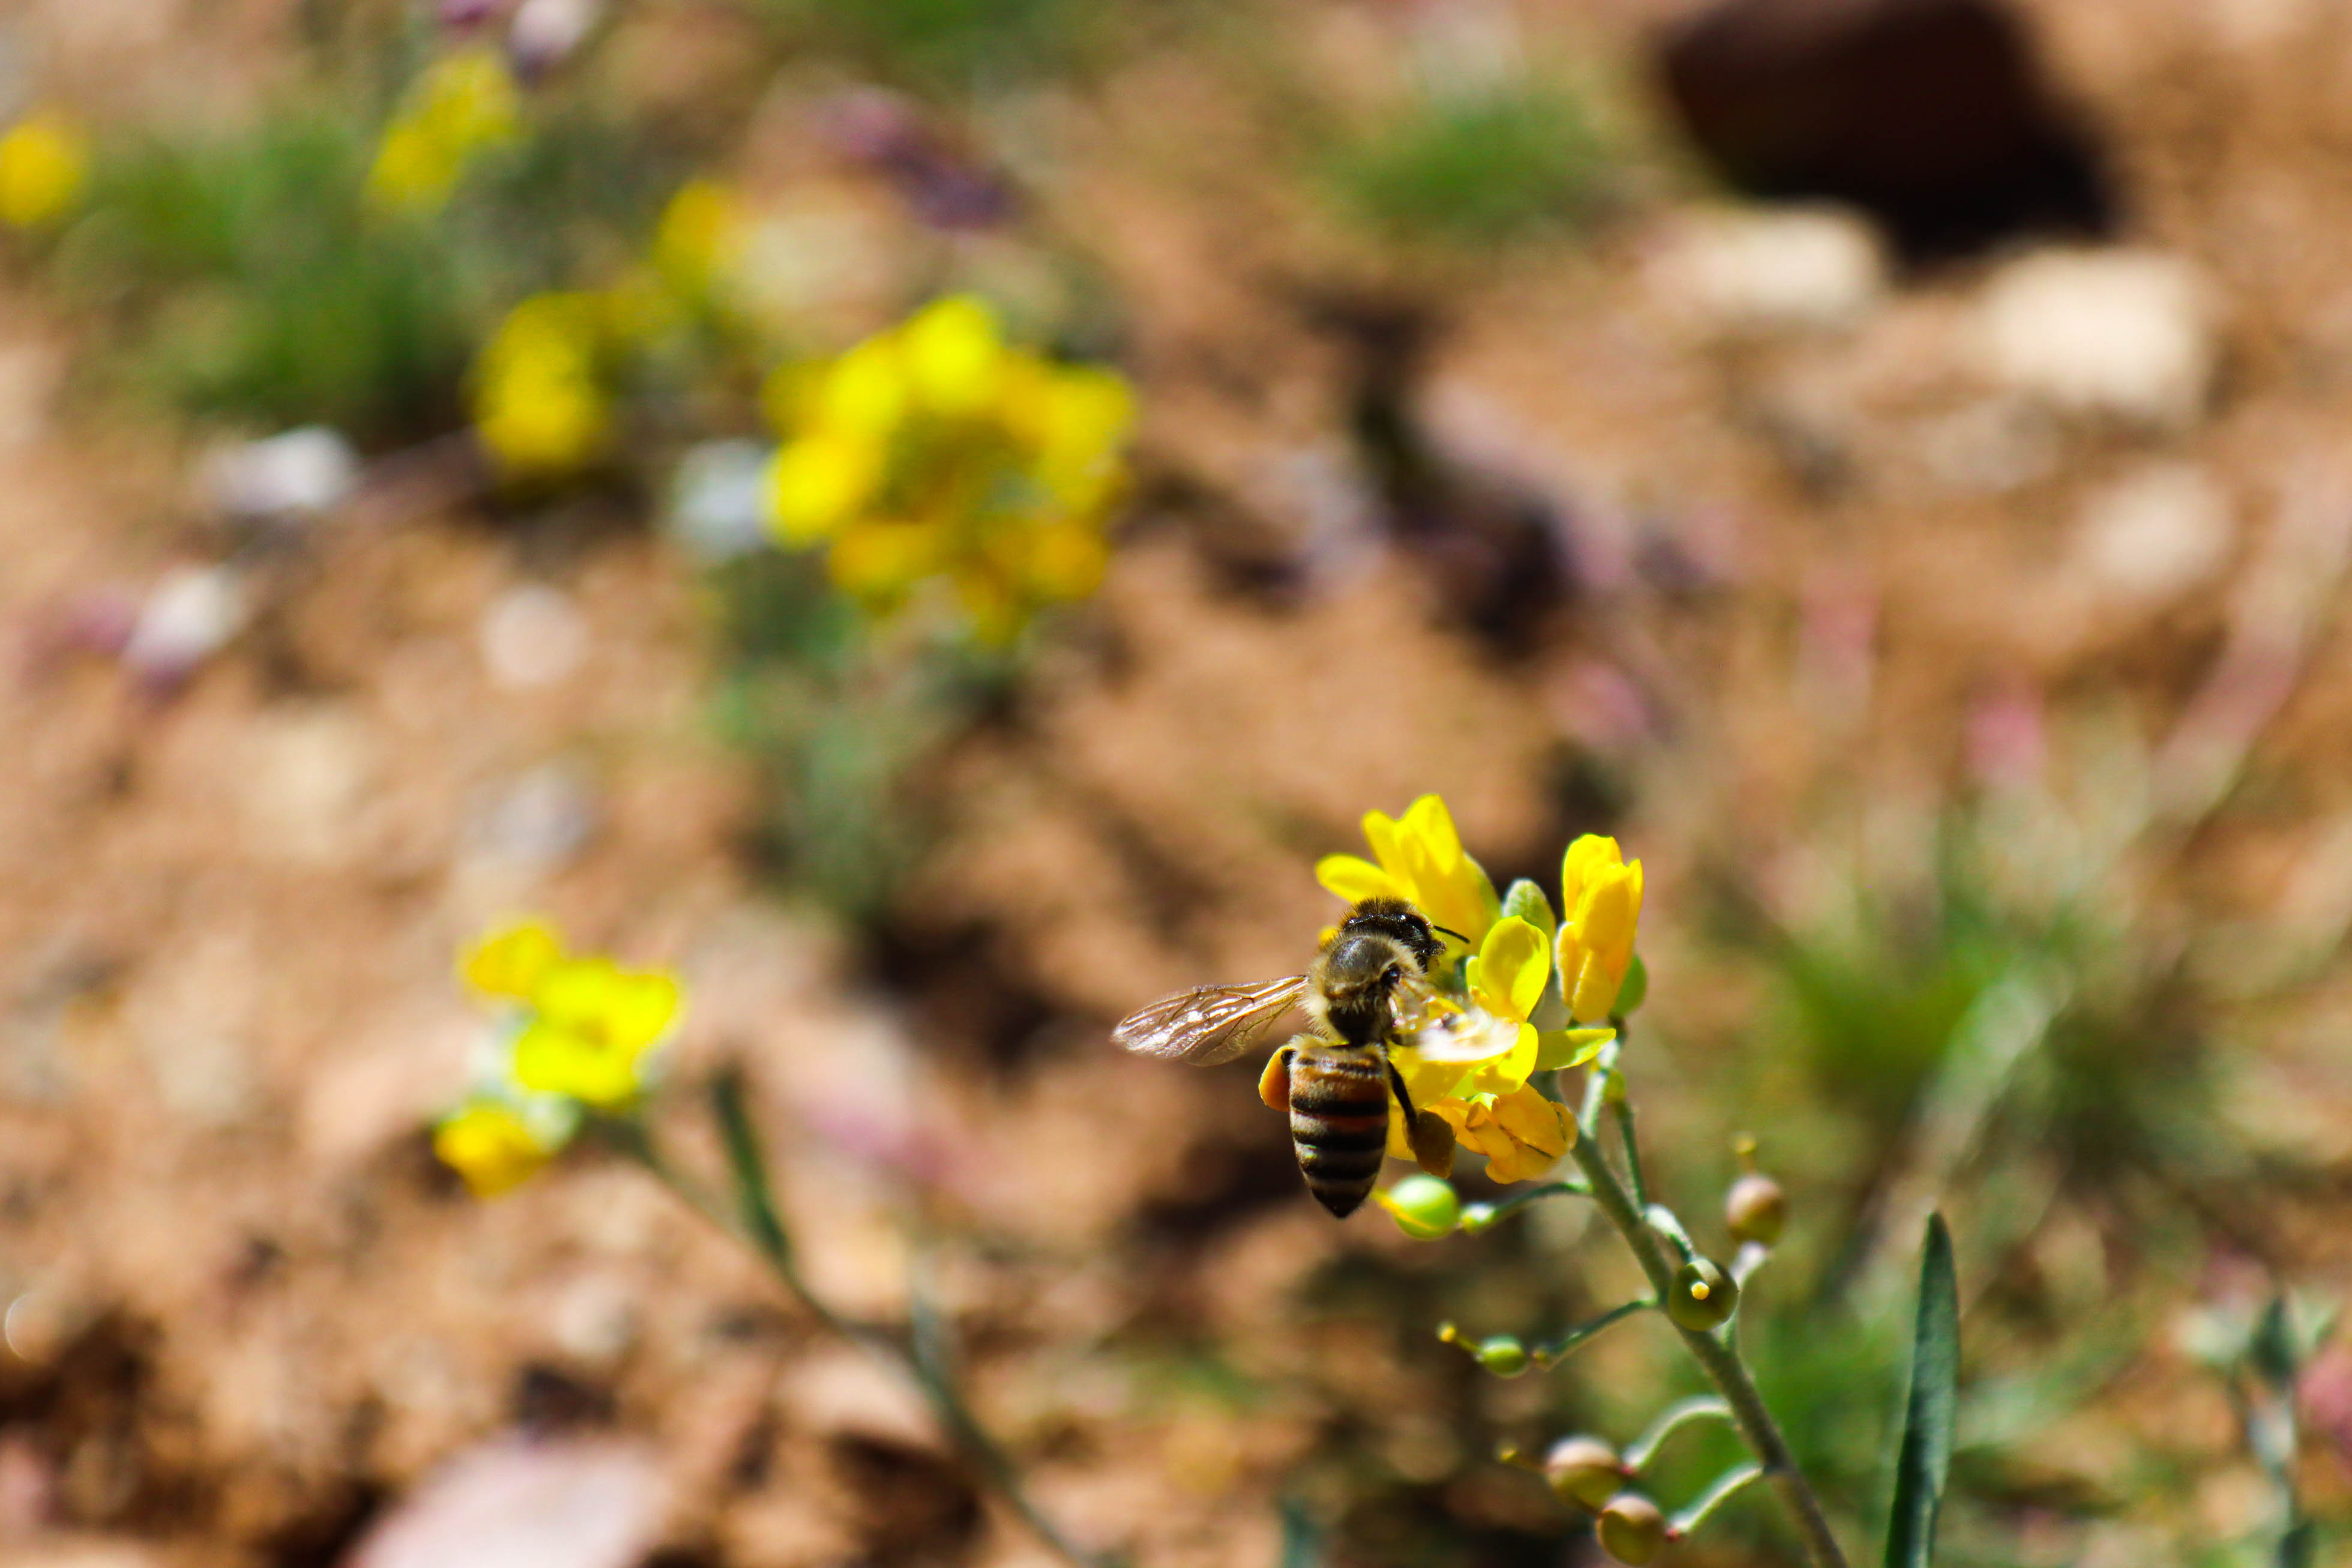 Photo by Joshua Villalpando  |  A cute bee gathering pollen with some nice scenery in the back ground.